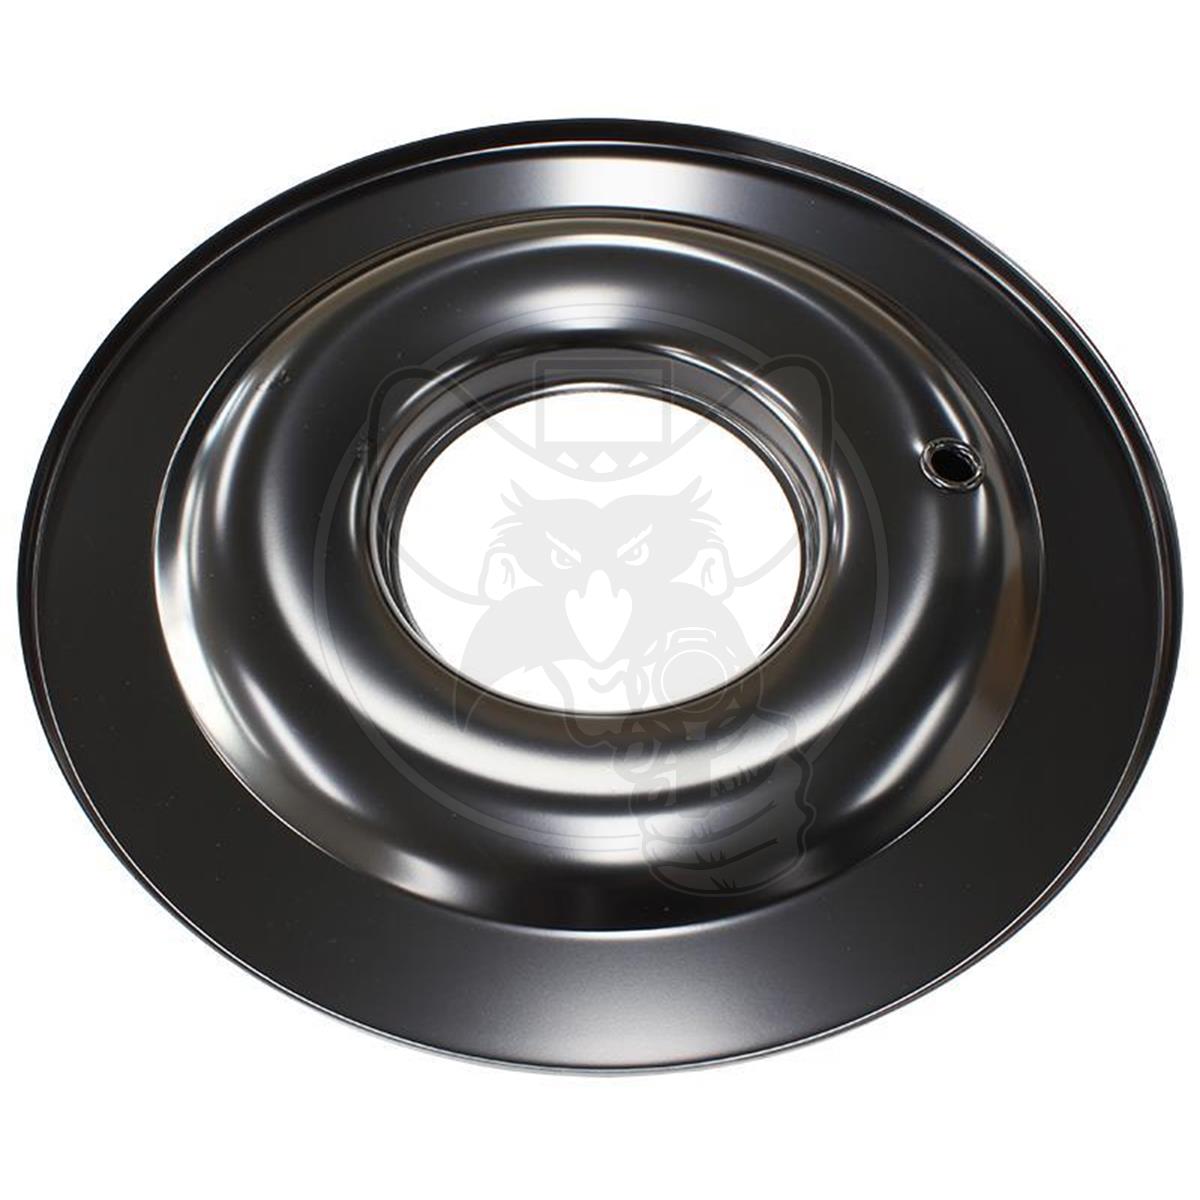 AEROFLOW 14" AIR CLEANER BASE ONLY BLACK FLAT FITS 5-1/8" NECK